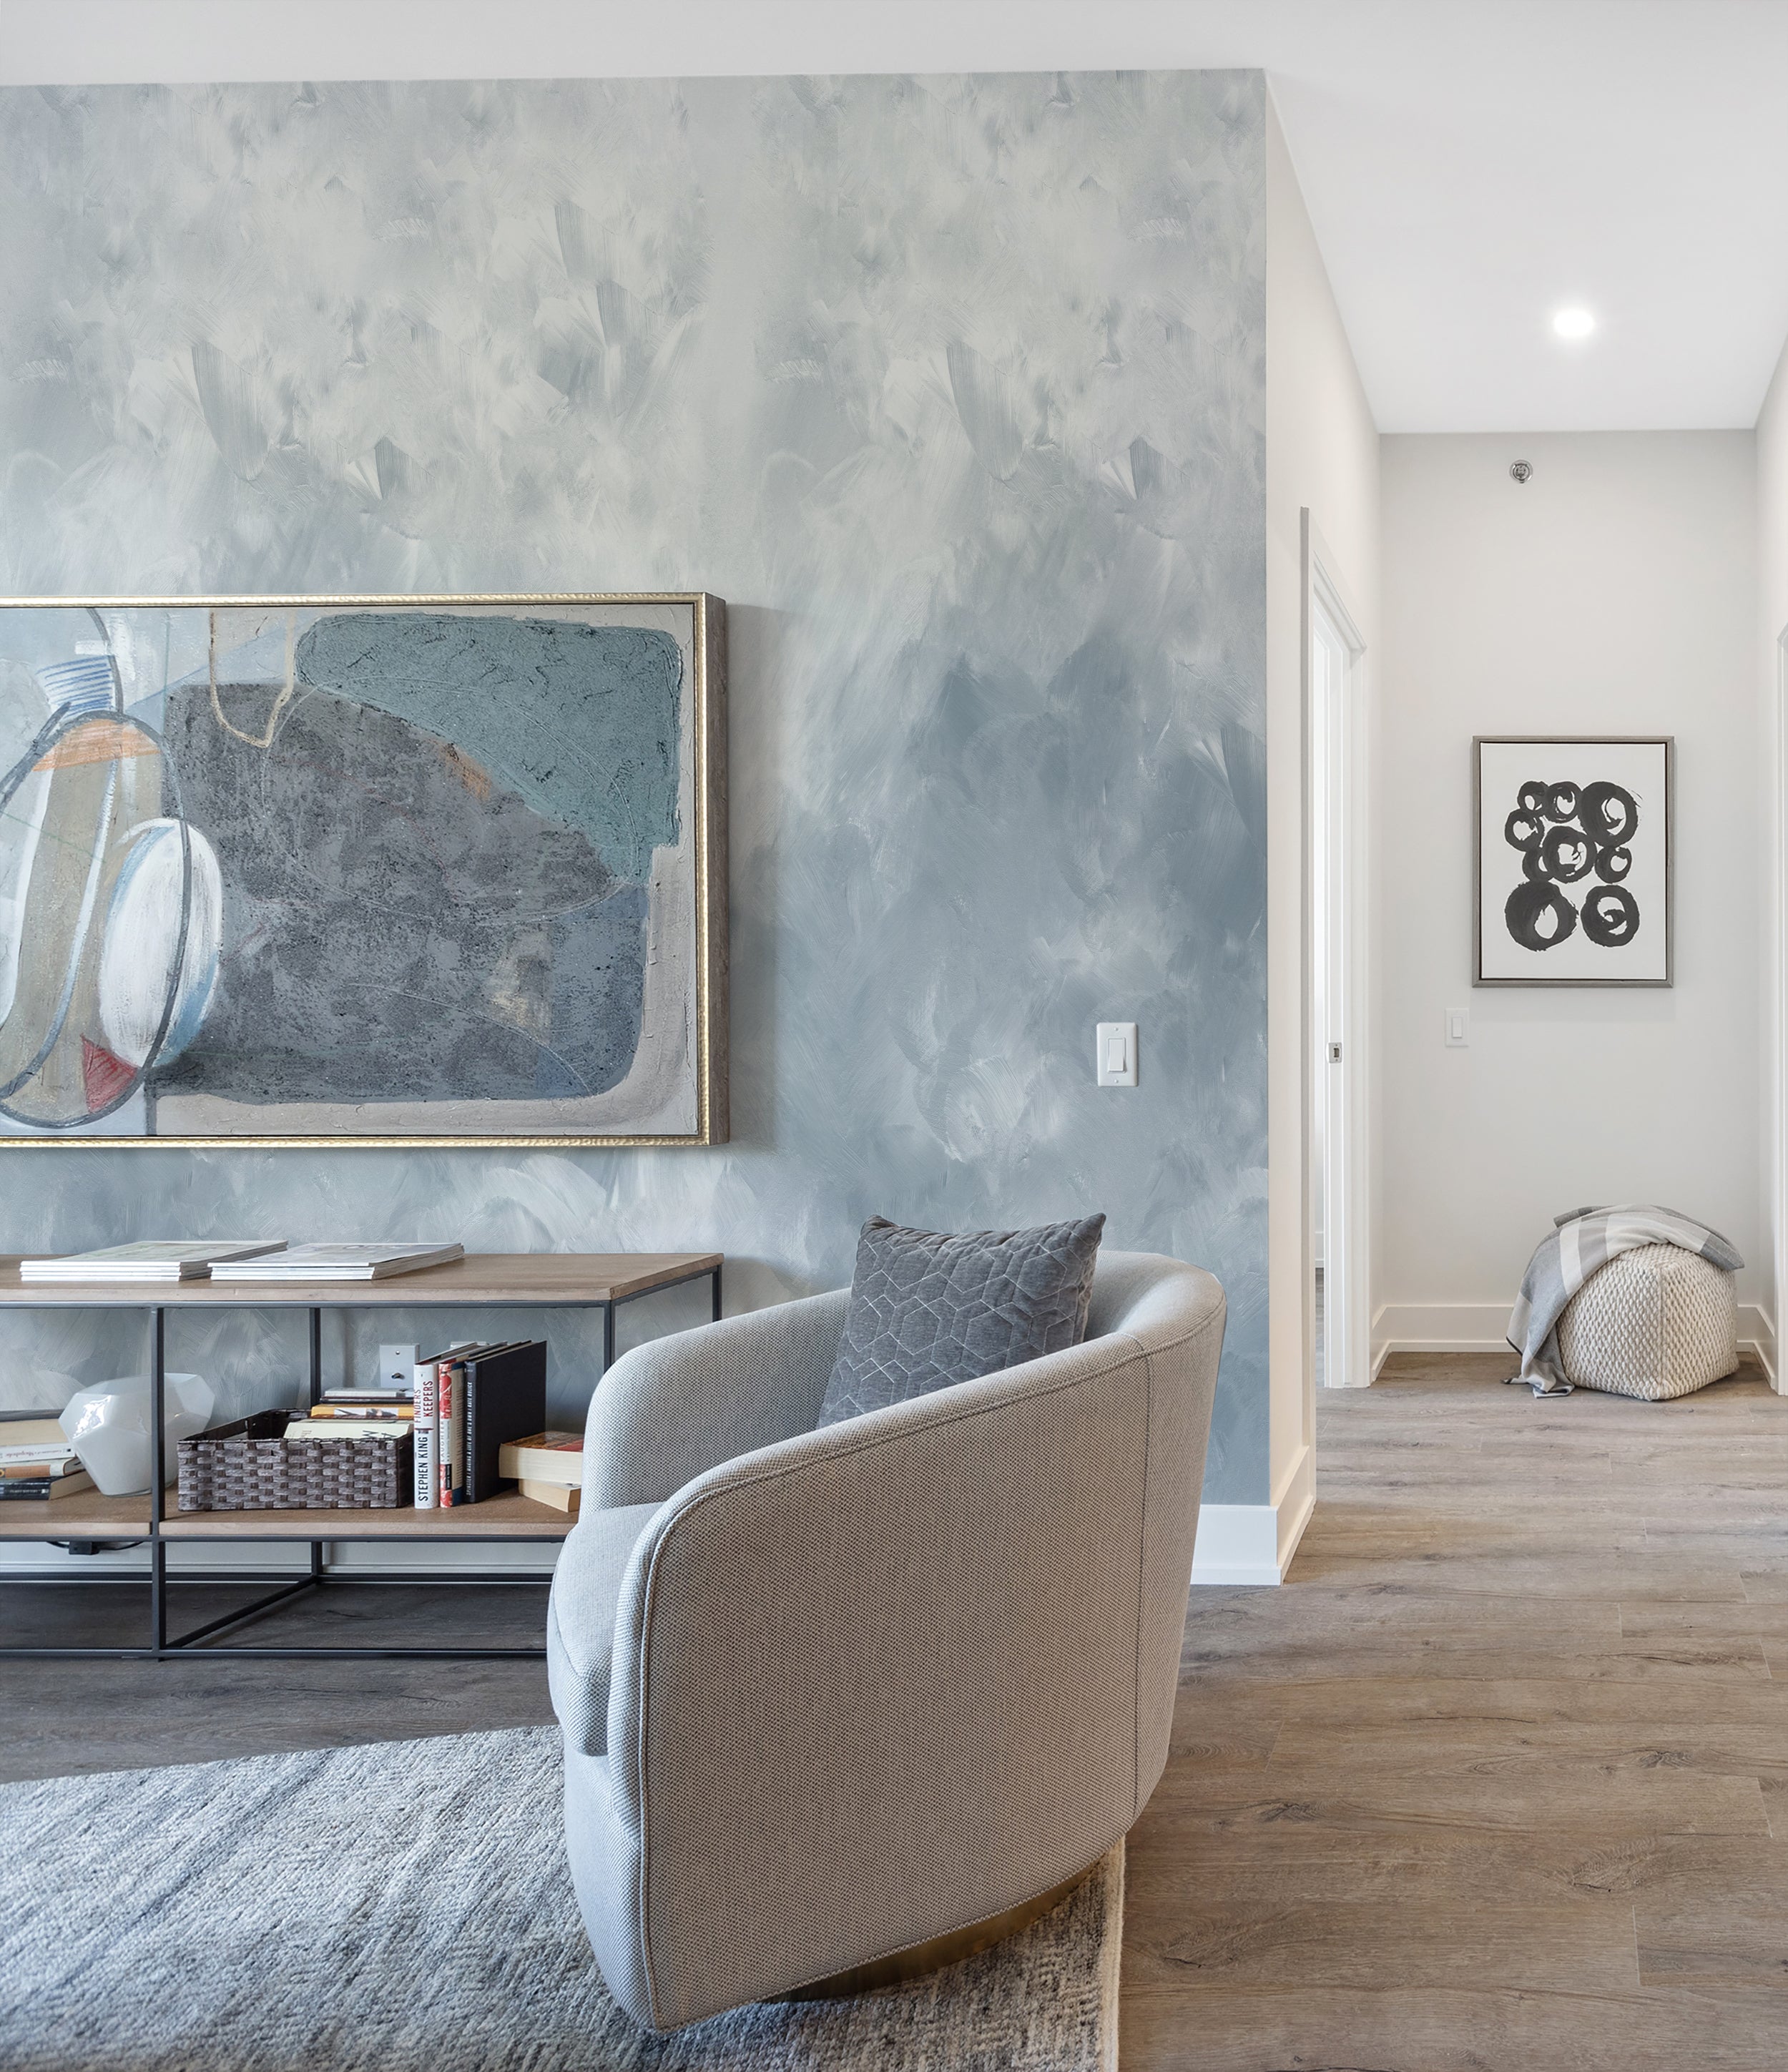 A contemporary living room corner with a curvy light grey armchair and a textured pale blue brush stroke wallpaper creating an abstract backdrop. The room is styled with a modern artwork and a sleek black console table, embodying a chic and artistic ambiance.